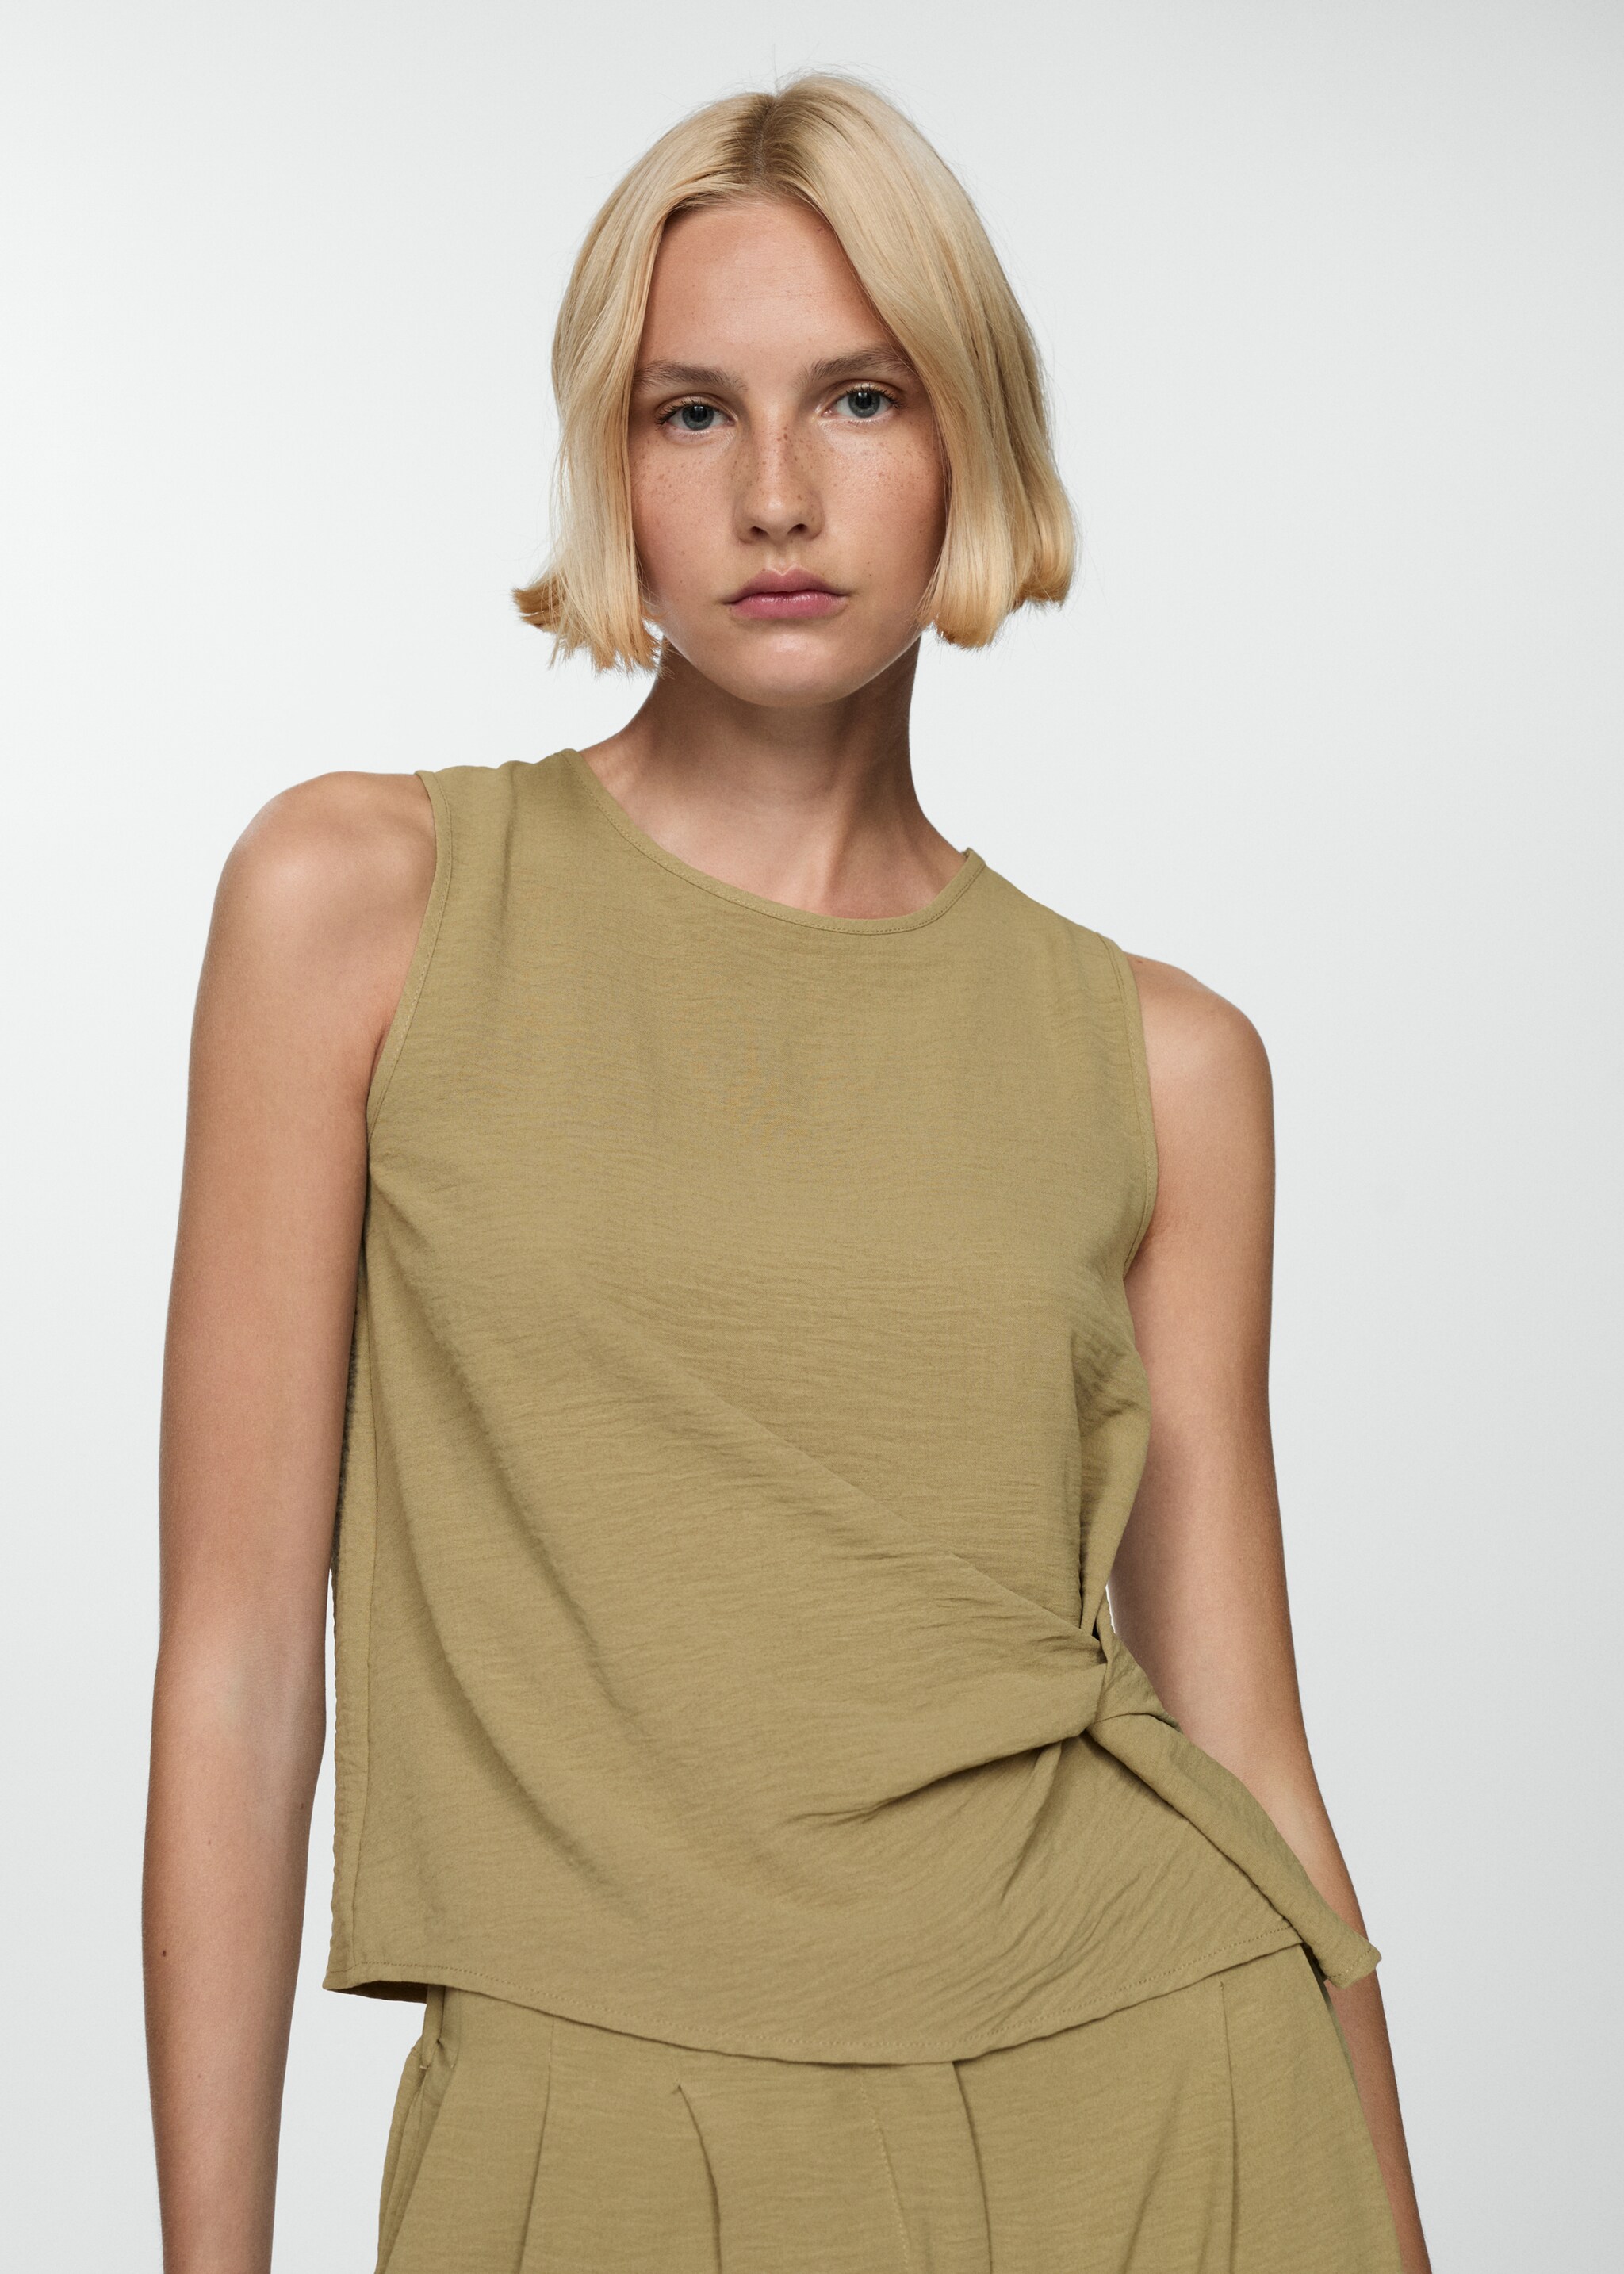 Textured top with knot detail - Medium plane